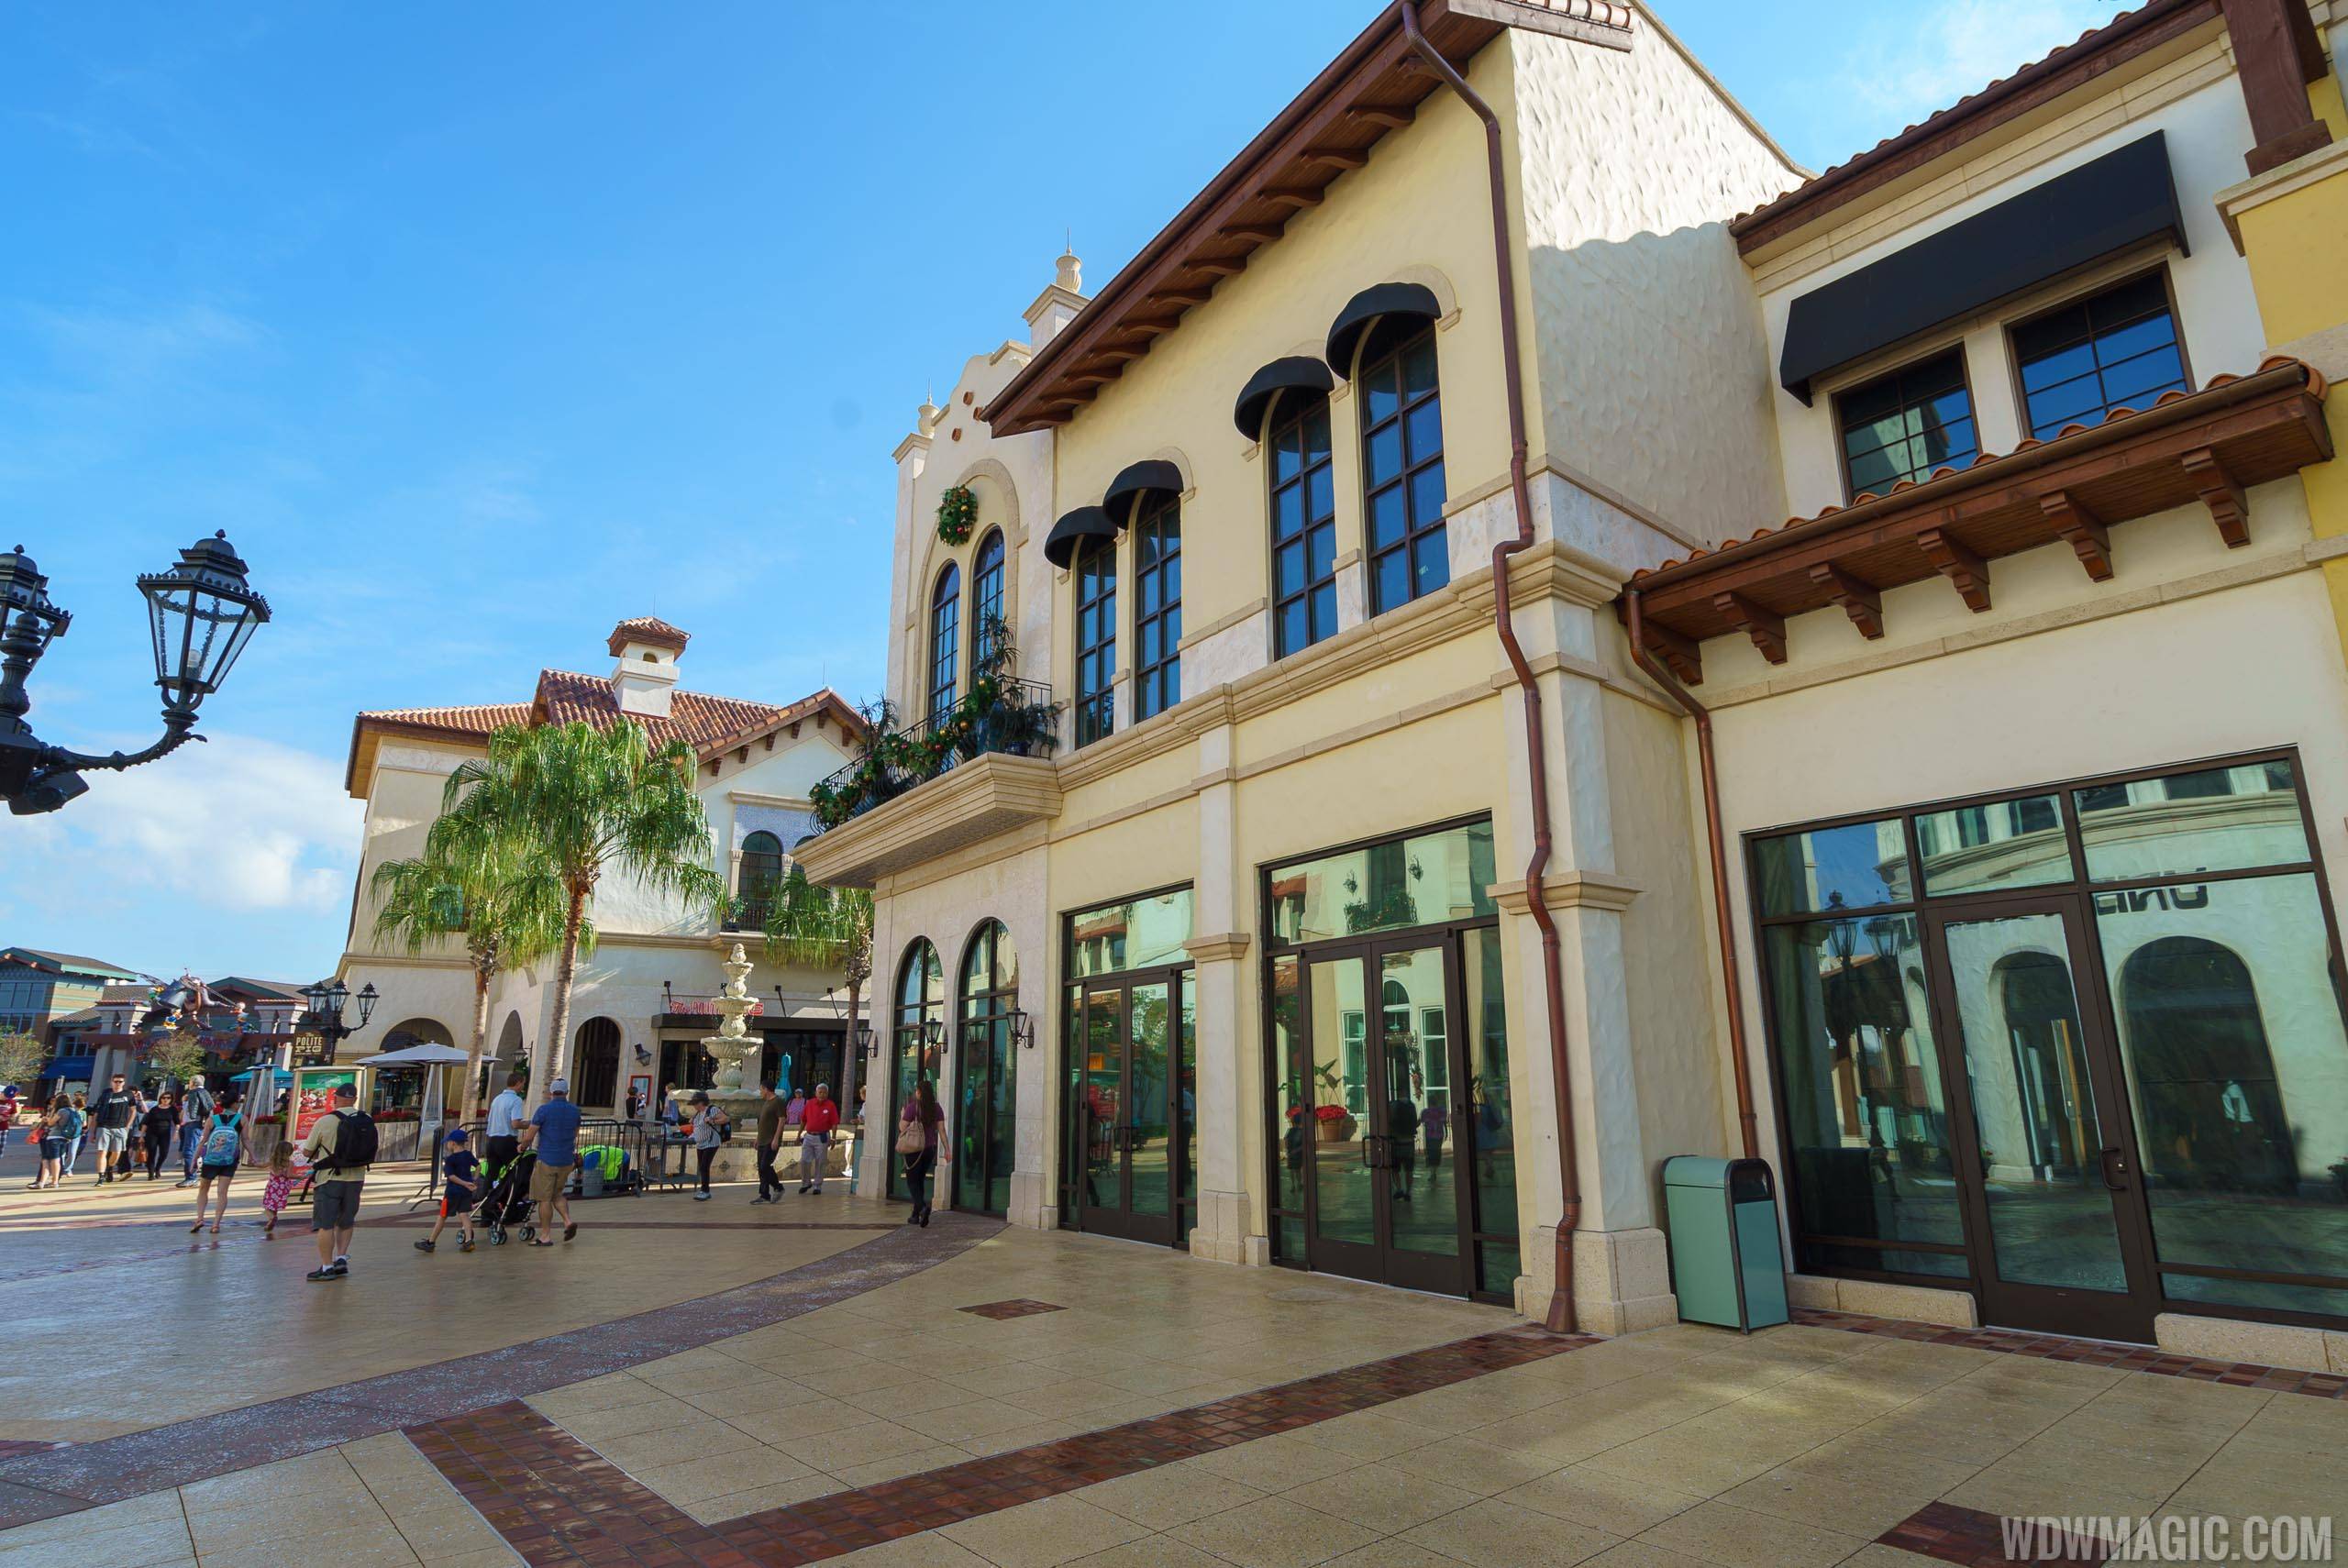 Temporary World of Disney location opening soon in the Town Center